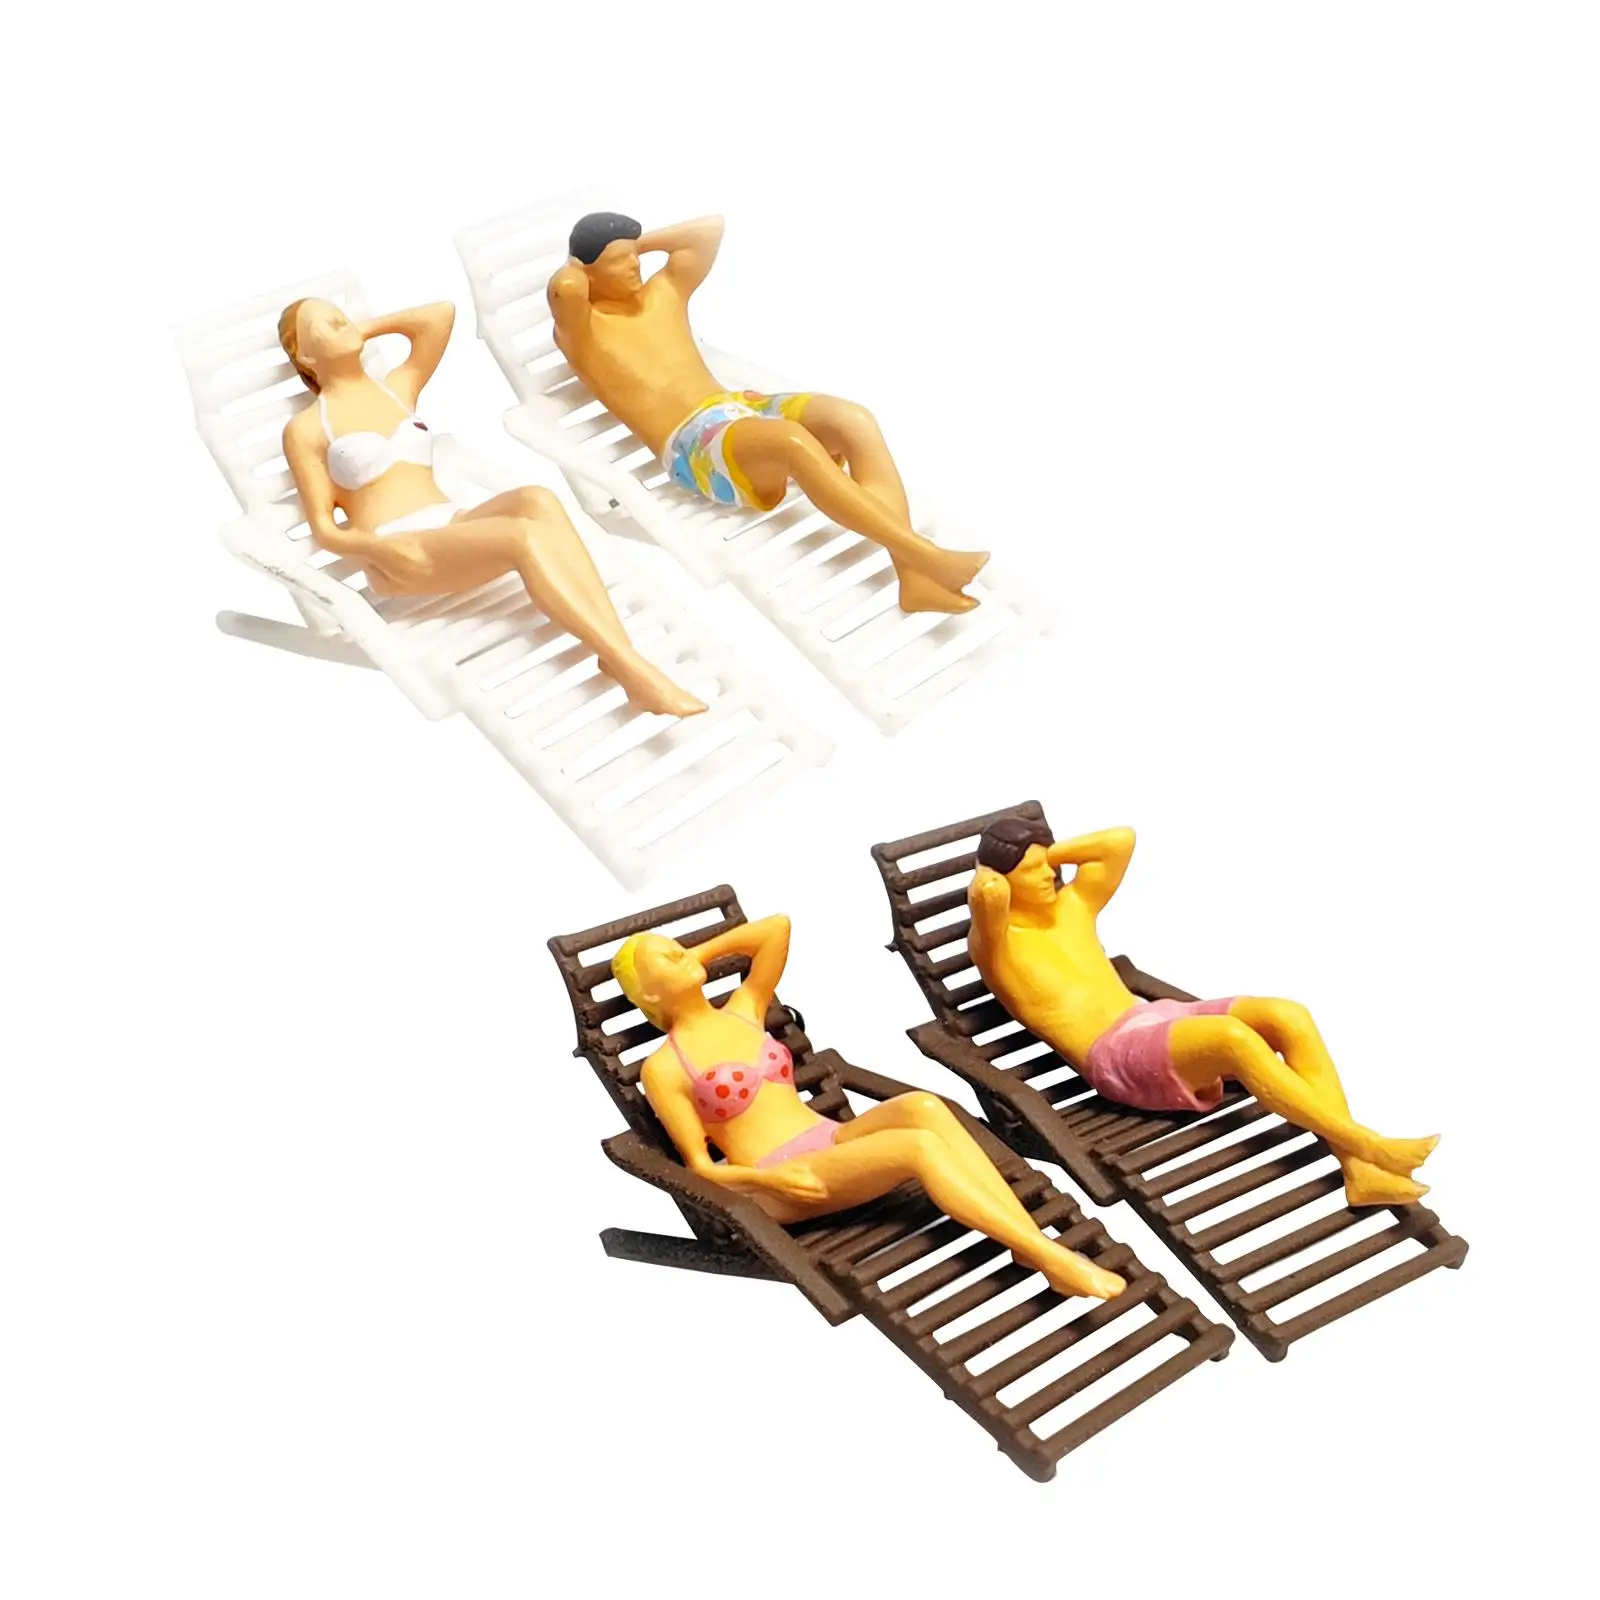 Realistic 1/64 Scale People Figurines Set Miniature People Model Deck Chair Model for DIY Scene Diorama Dollhouse Layout Decor